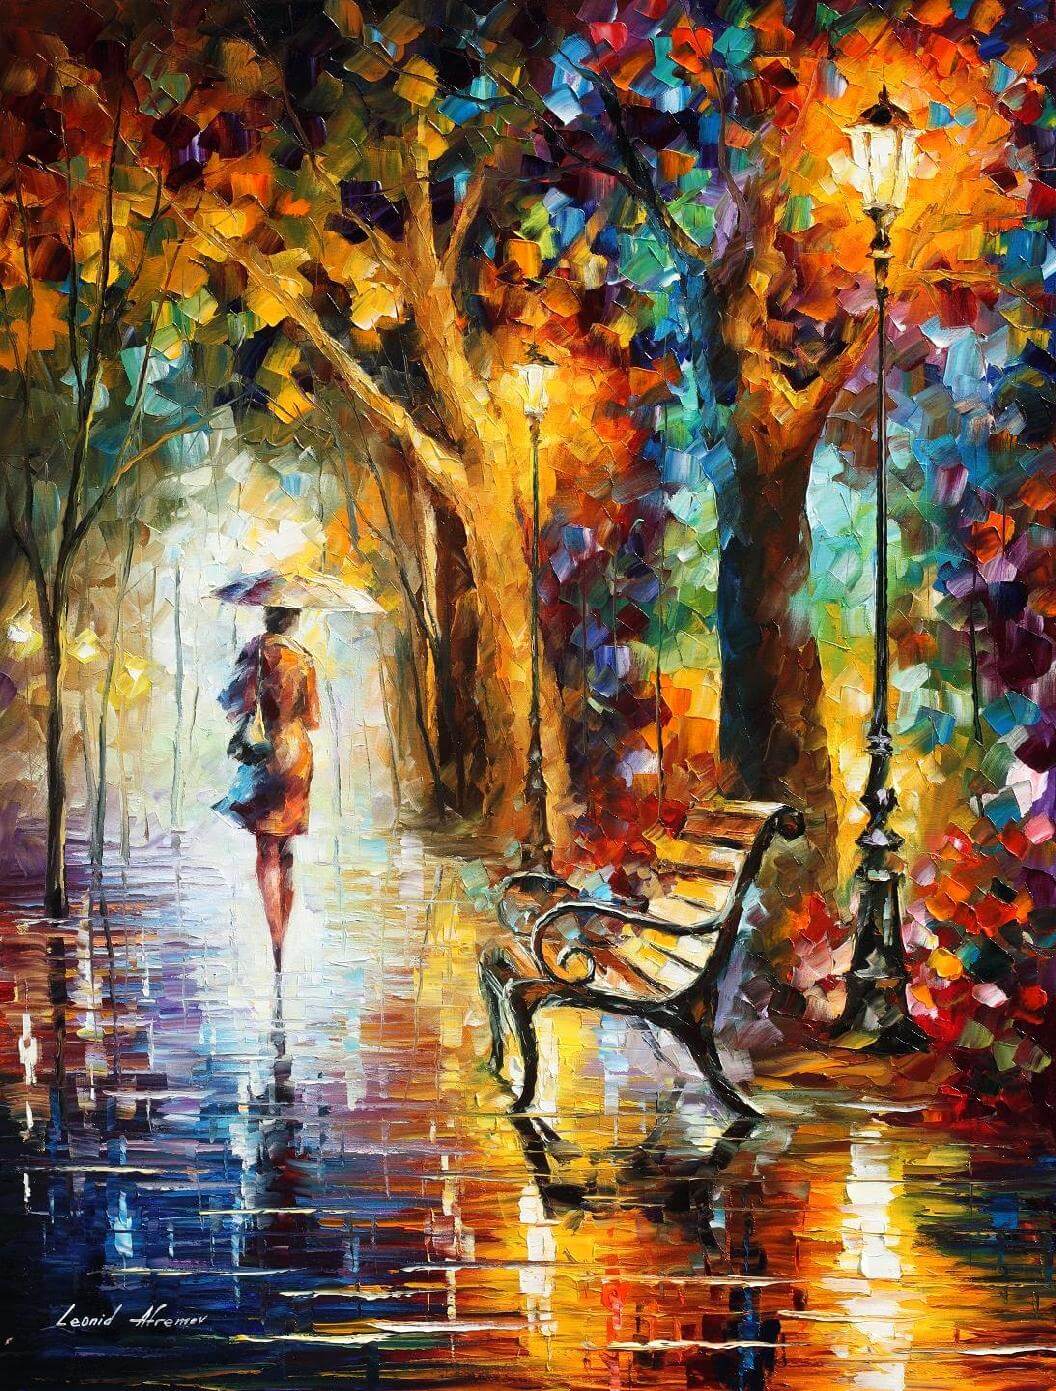 Leonid Afremov  THE END OF PATIENCE Puzzle Painting